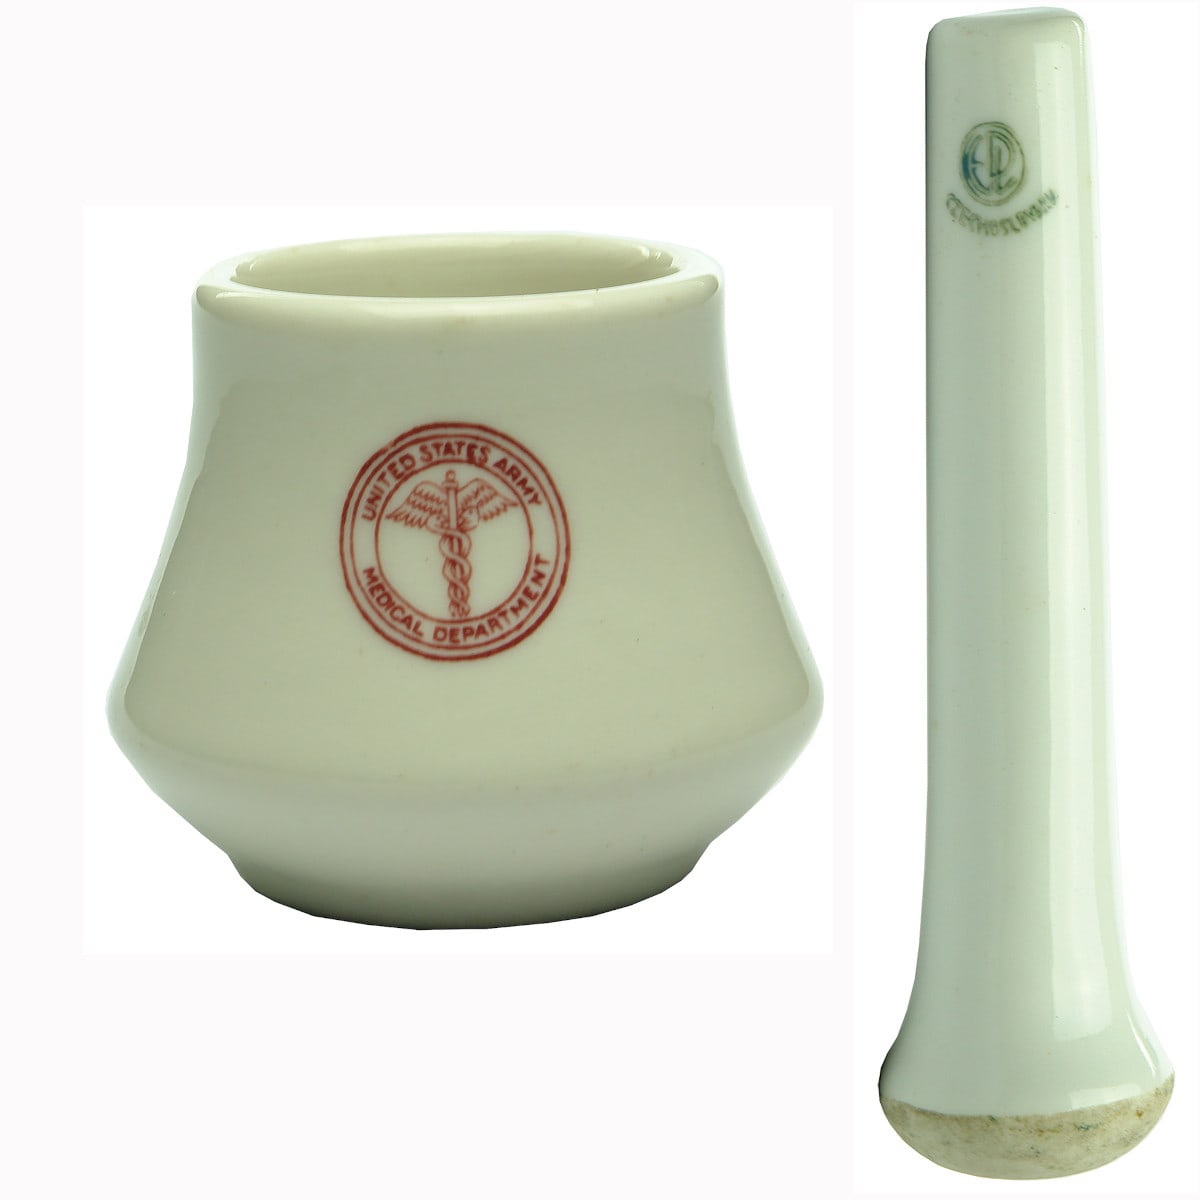 Pharmacy. United States Army Mortar and Pestle.